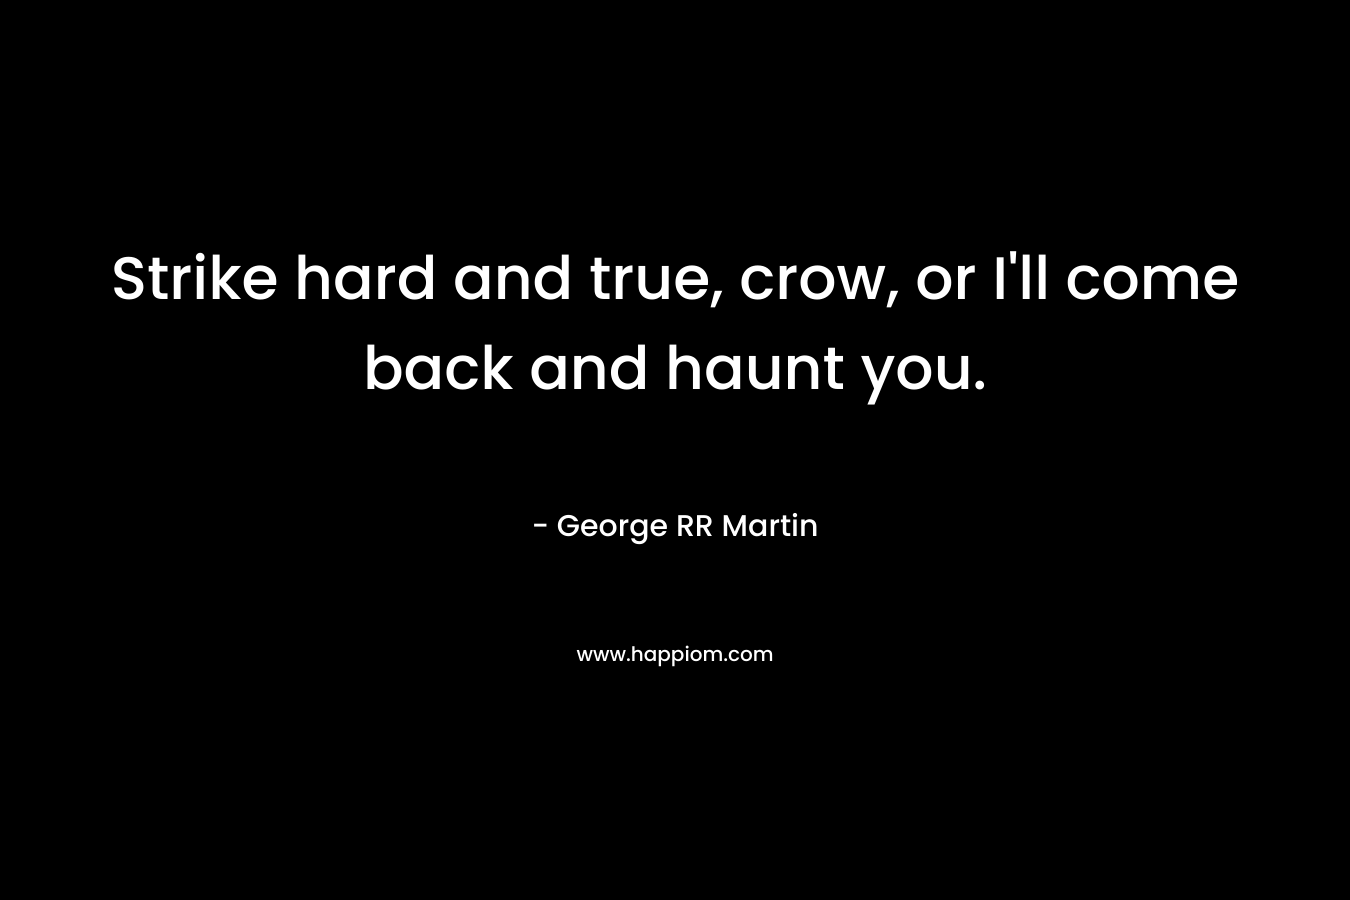 Strike hard and true, crow, or I’ll come back and haunt you. – George RR Martin